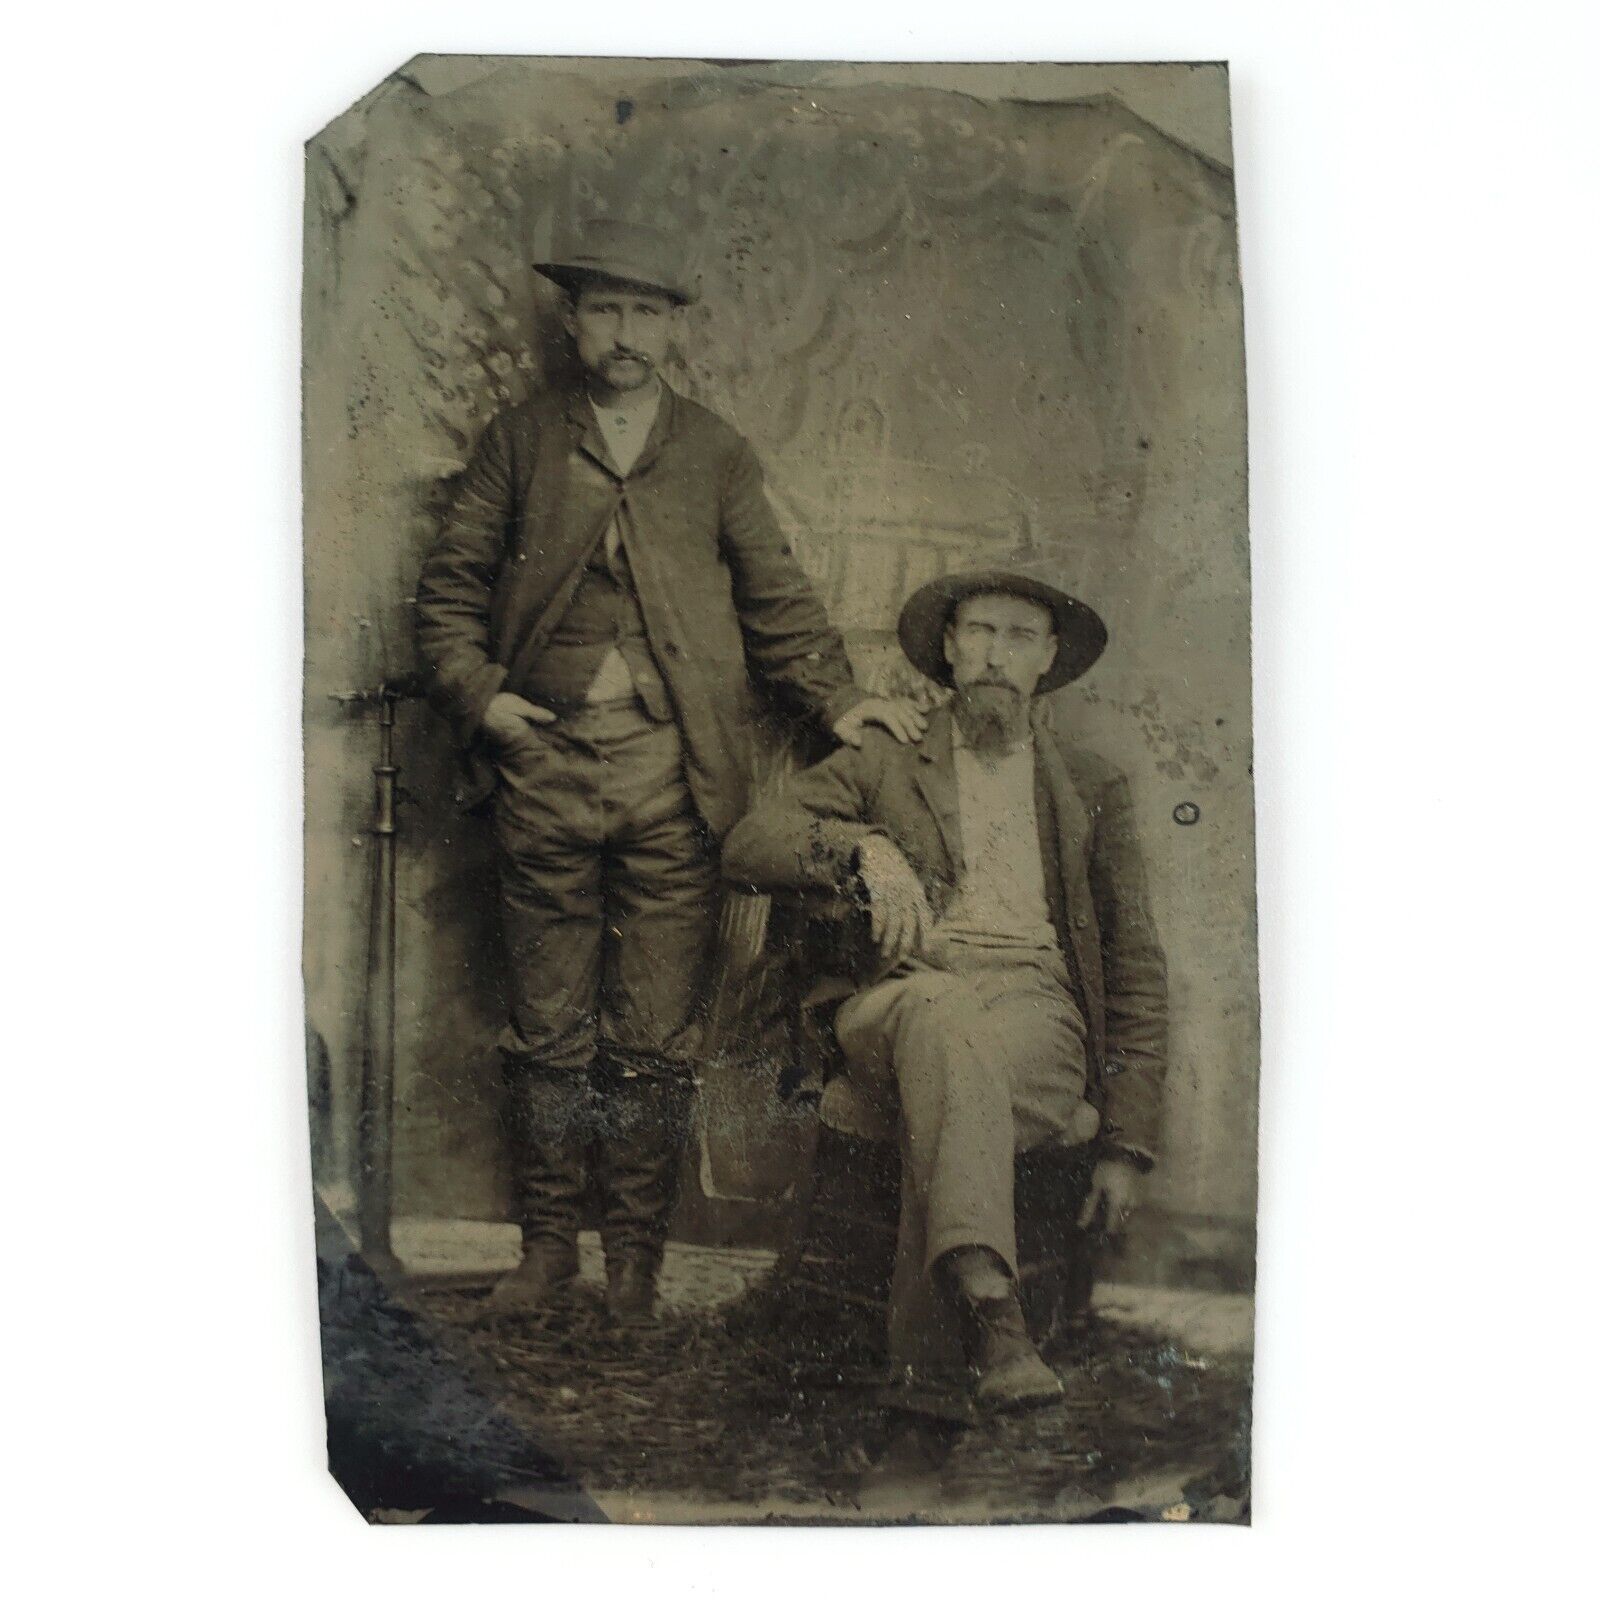 Affectionate Old West Men Tintype c1870 Antique Western 1/6 Plate Photo A3835